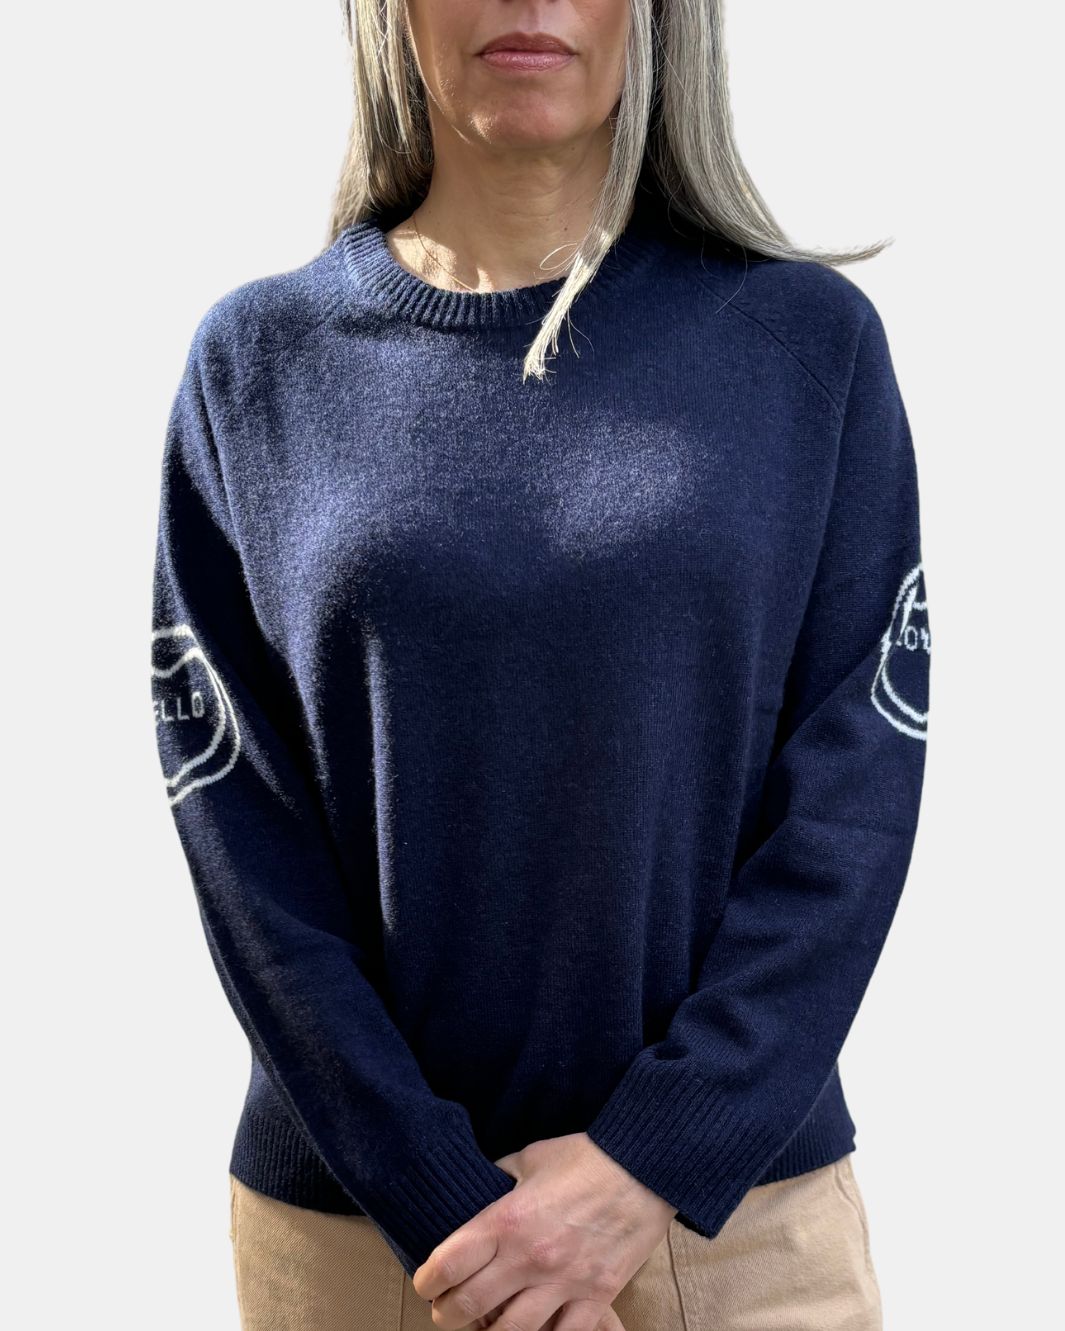 LOVE HELLO SWEATER IN NAVY - Romi Boutique